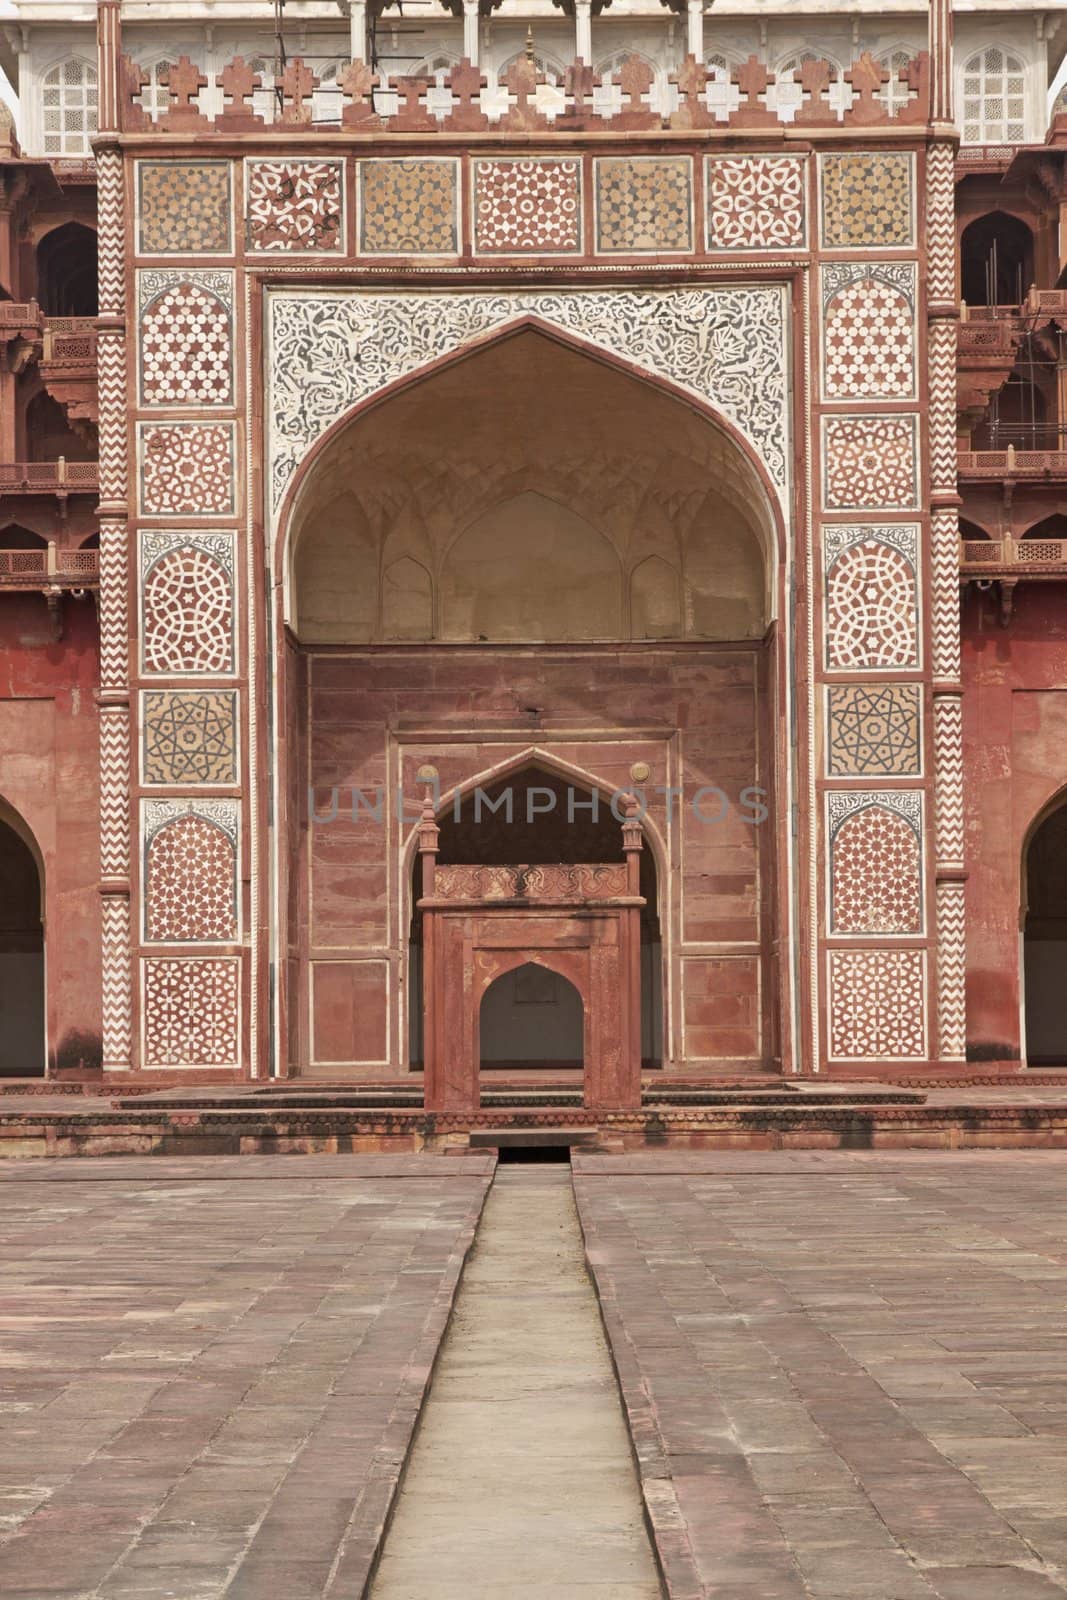 Islamic Tomb. Dry water channel leading to the chamber housing the tomb of the Mughal Emperor Akbar at Sikandra on the outskirts of Agra, Uttar Pradesh, India.